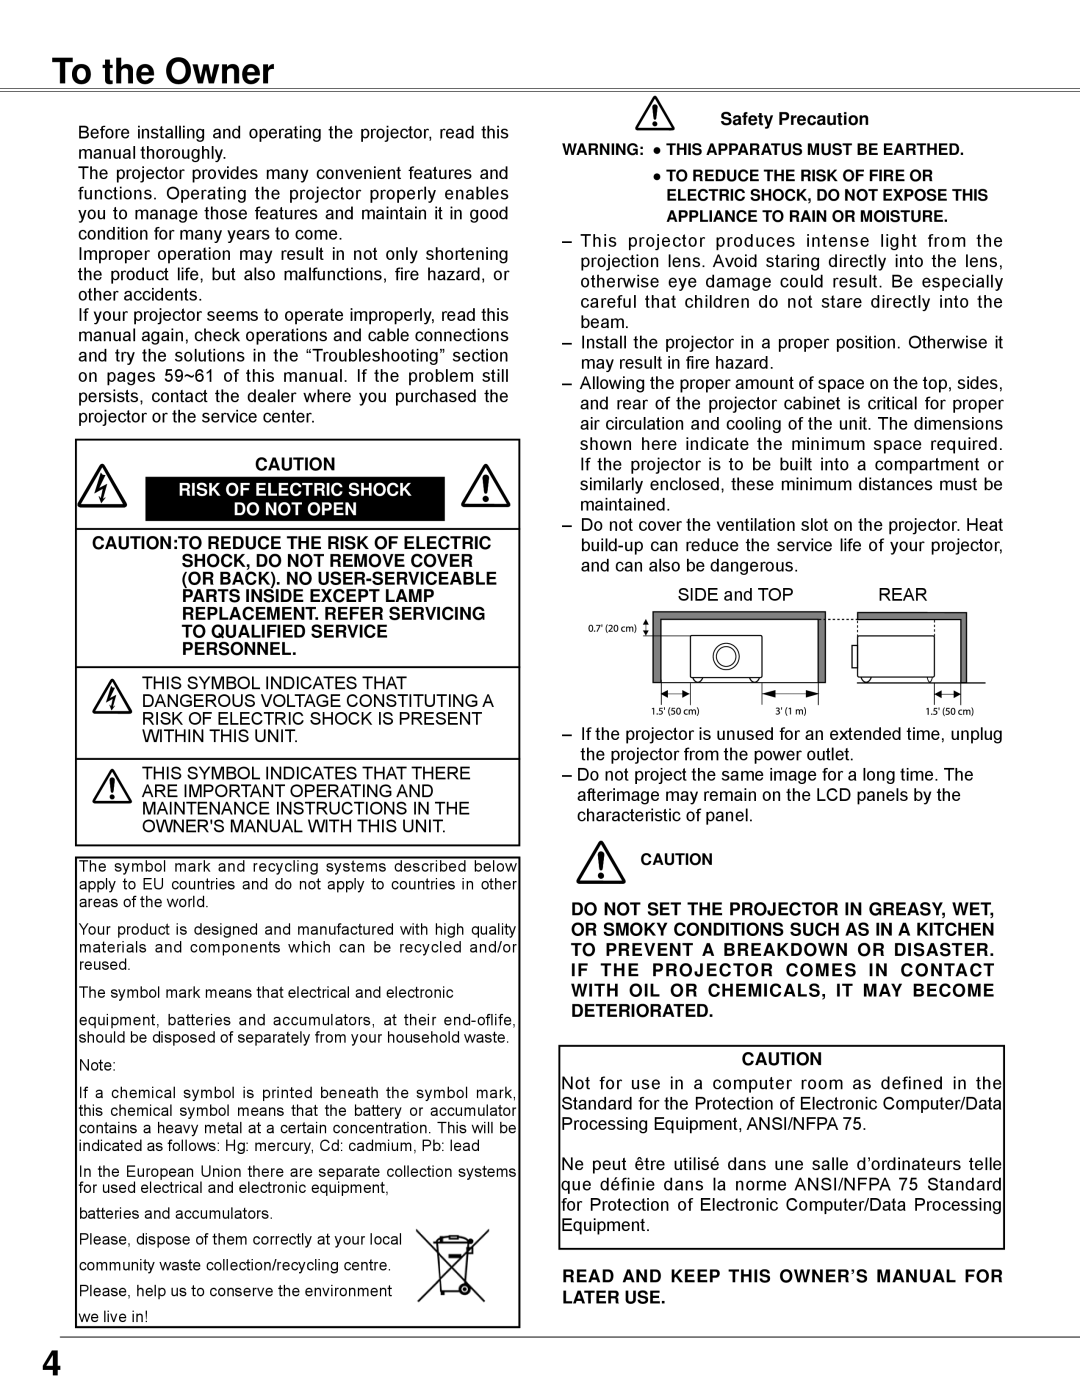 Sanyo PLC-WXE45 owner manual To the Owner, Risk Of Electric Shock Do Not Open, Safety Precaution 